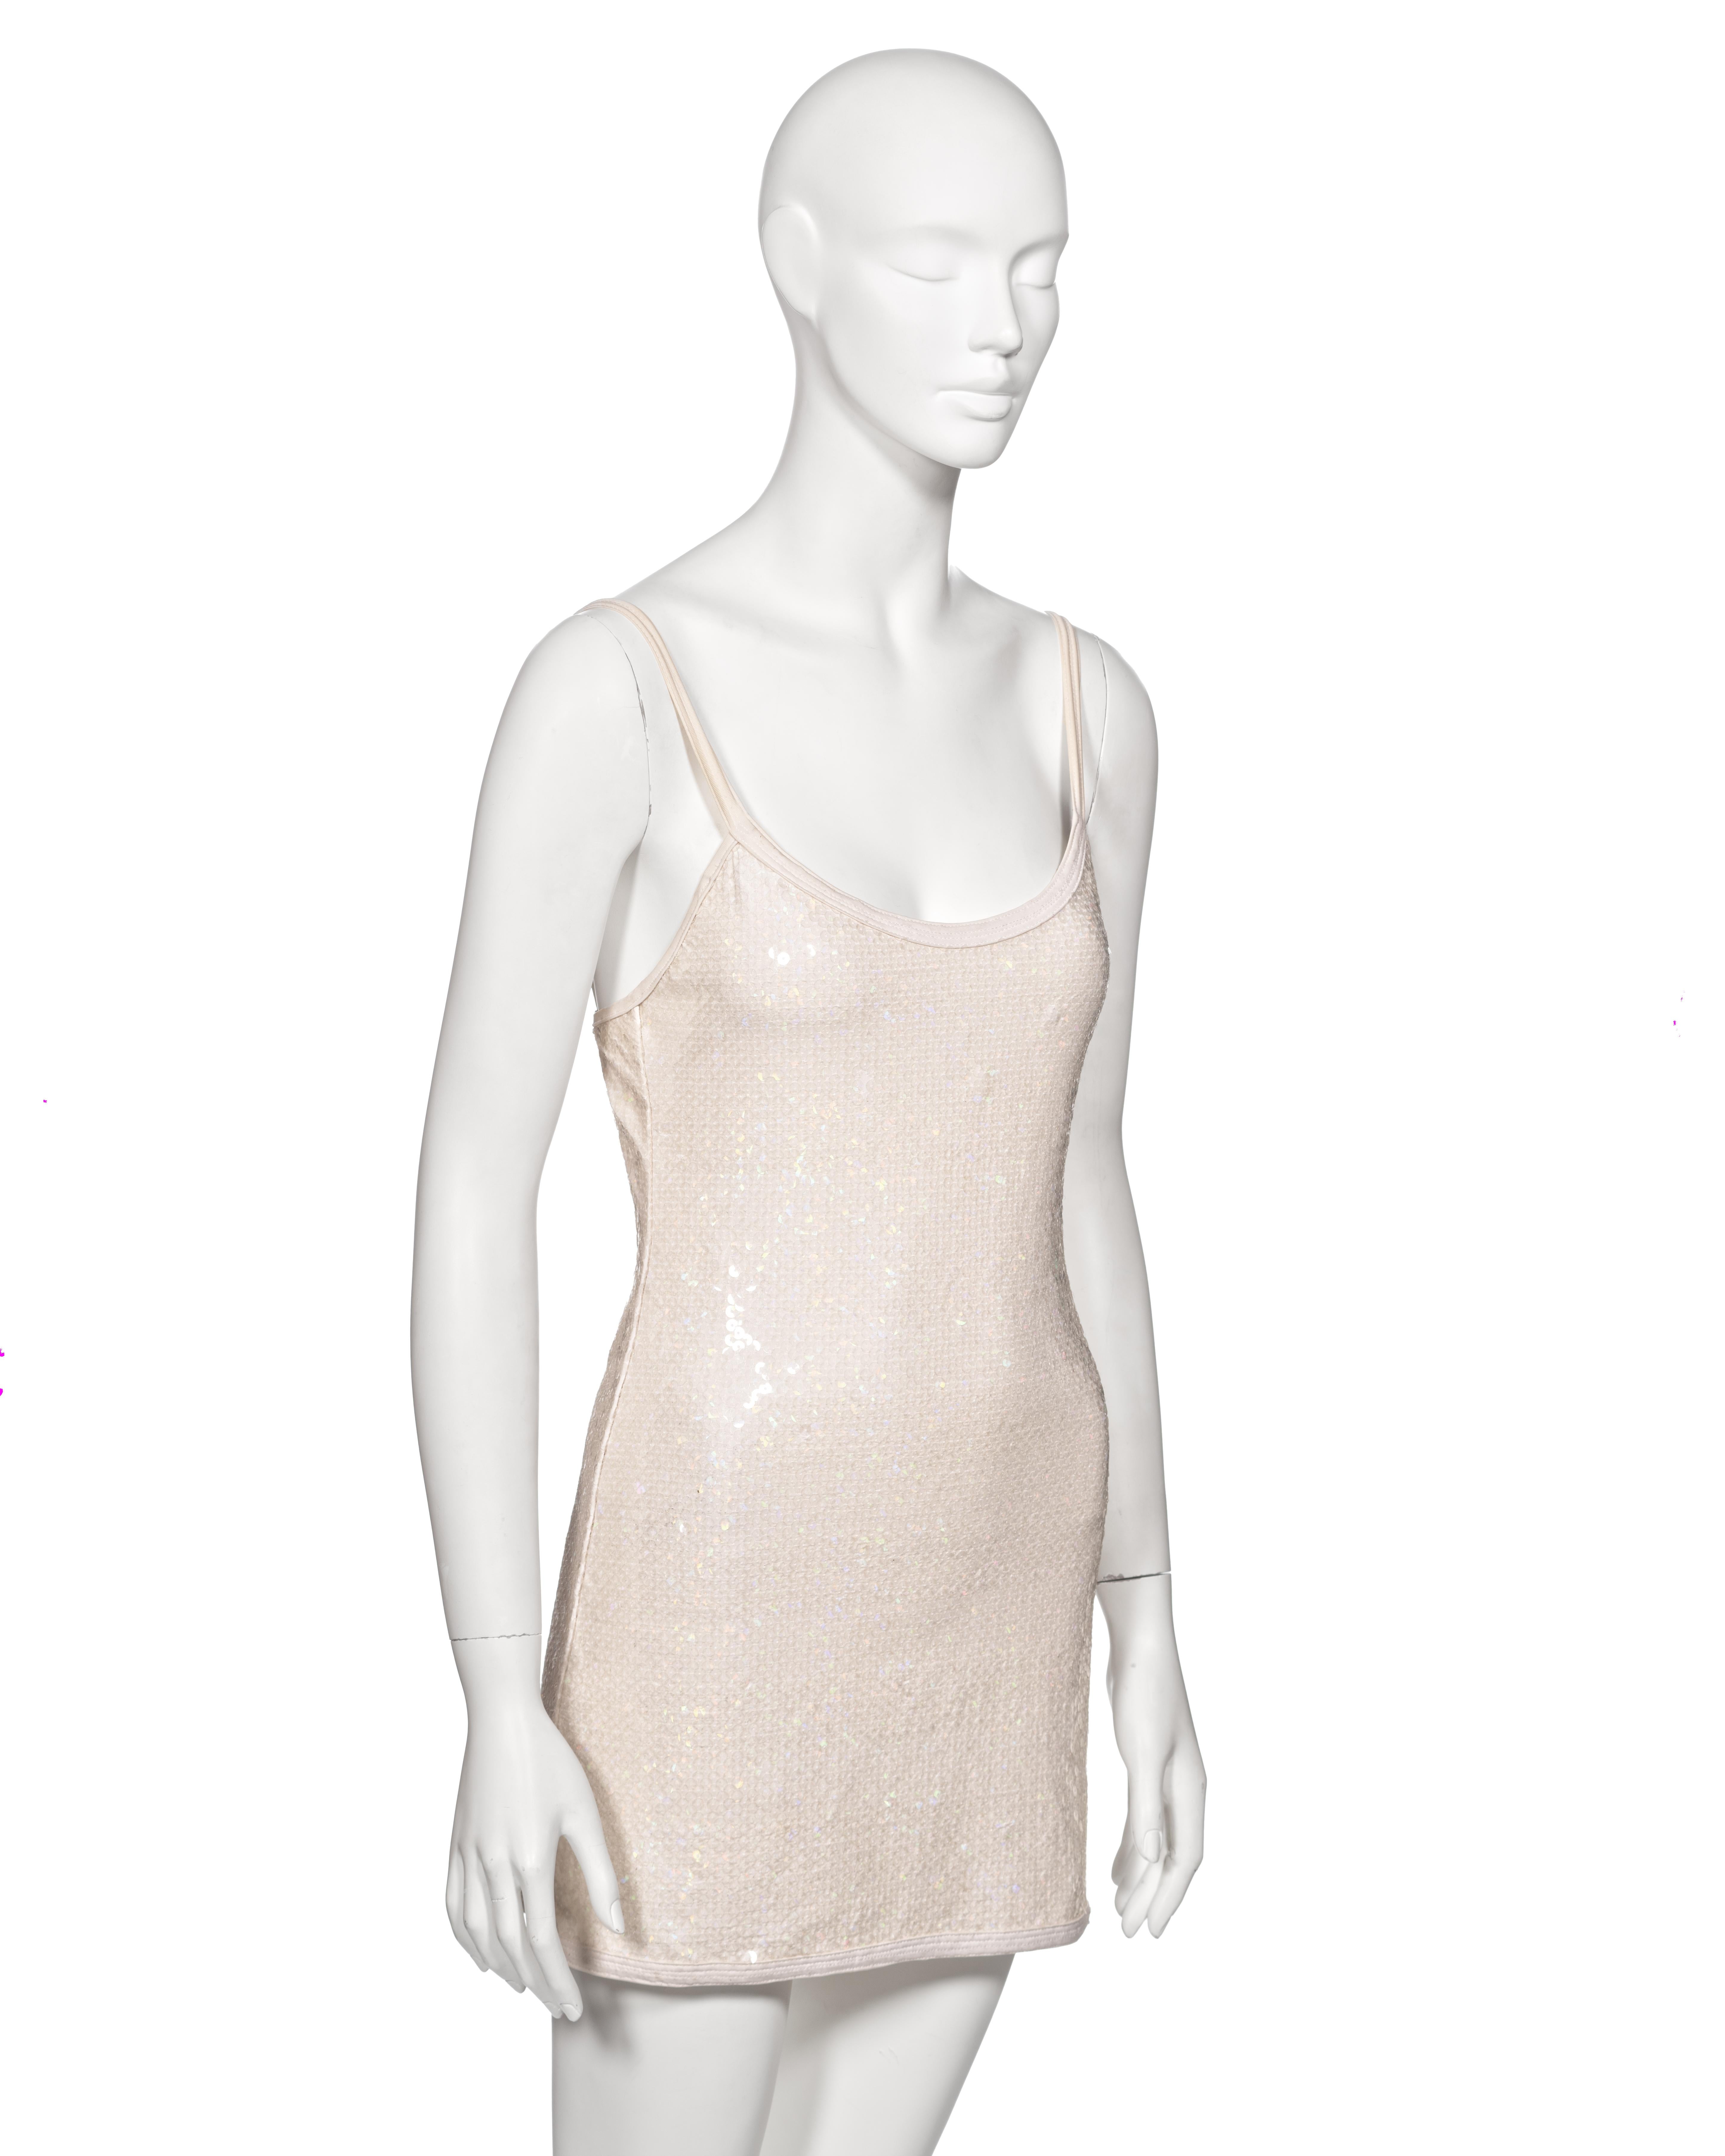 Chanel by Karl Lagerfeld White Iridescent Sequin Mini Dress, ss 2005 For Sale 1